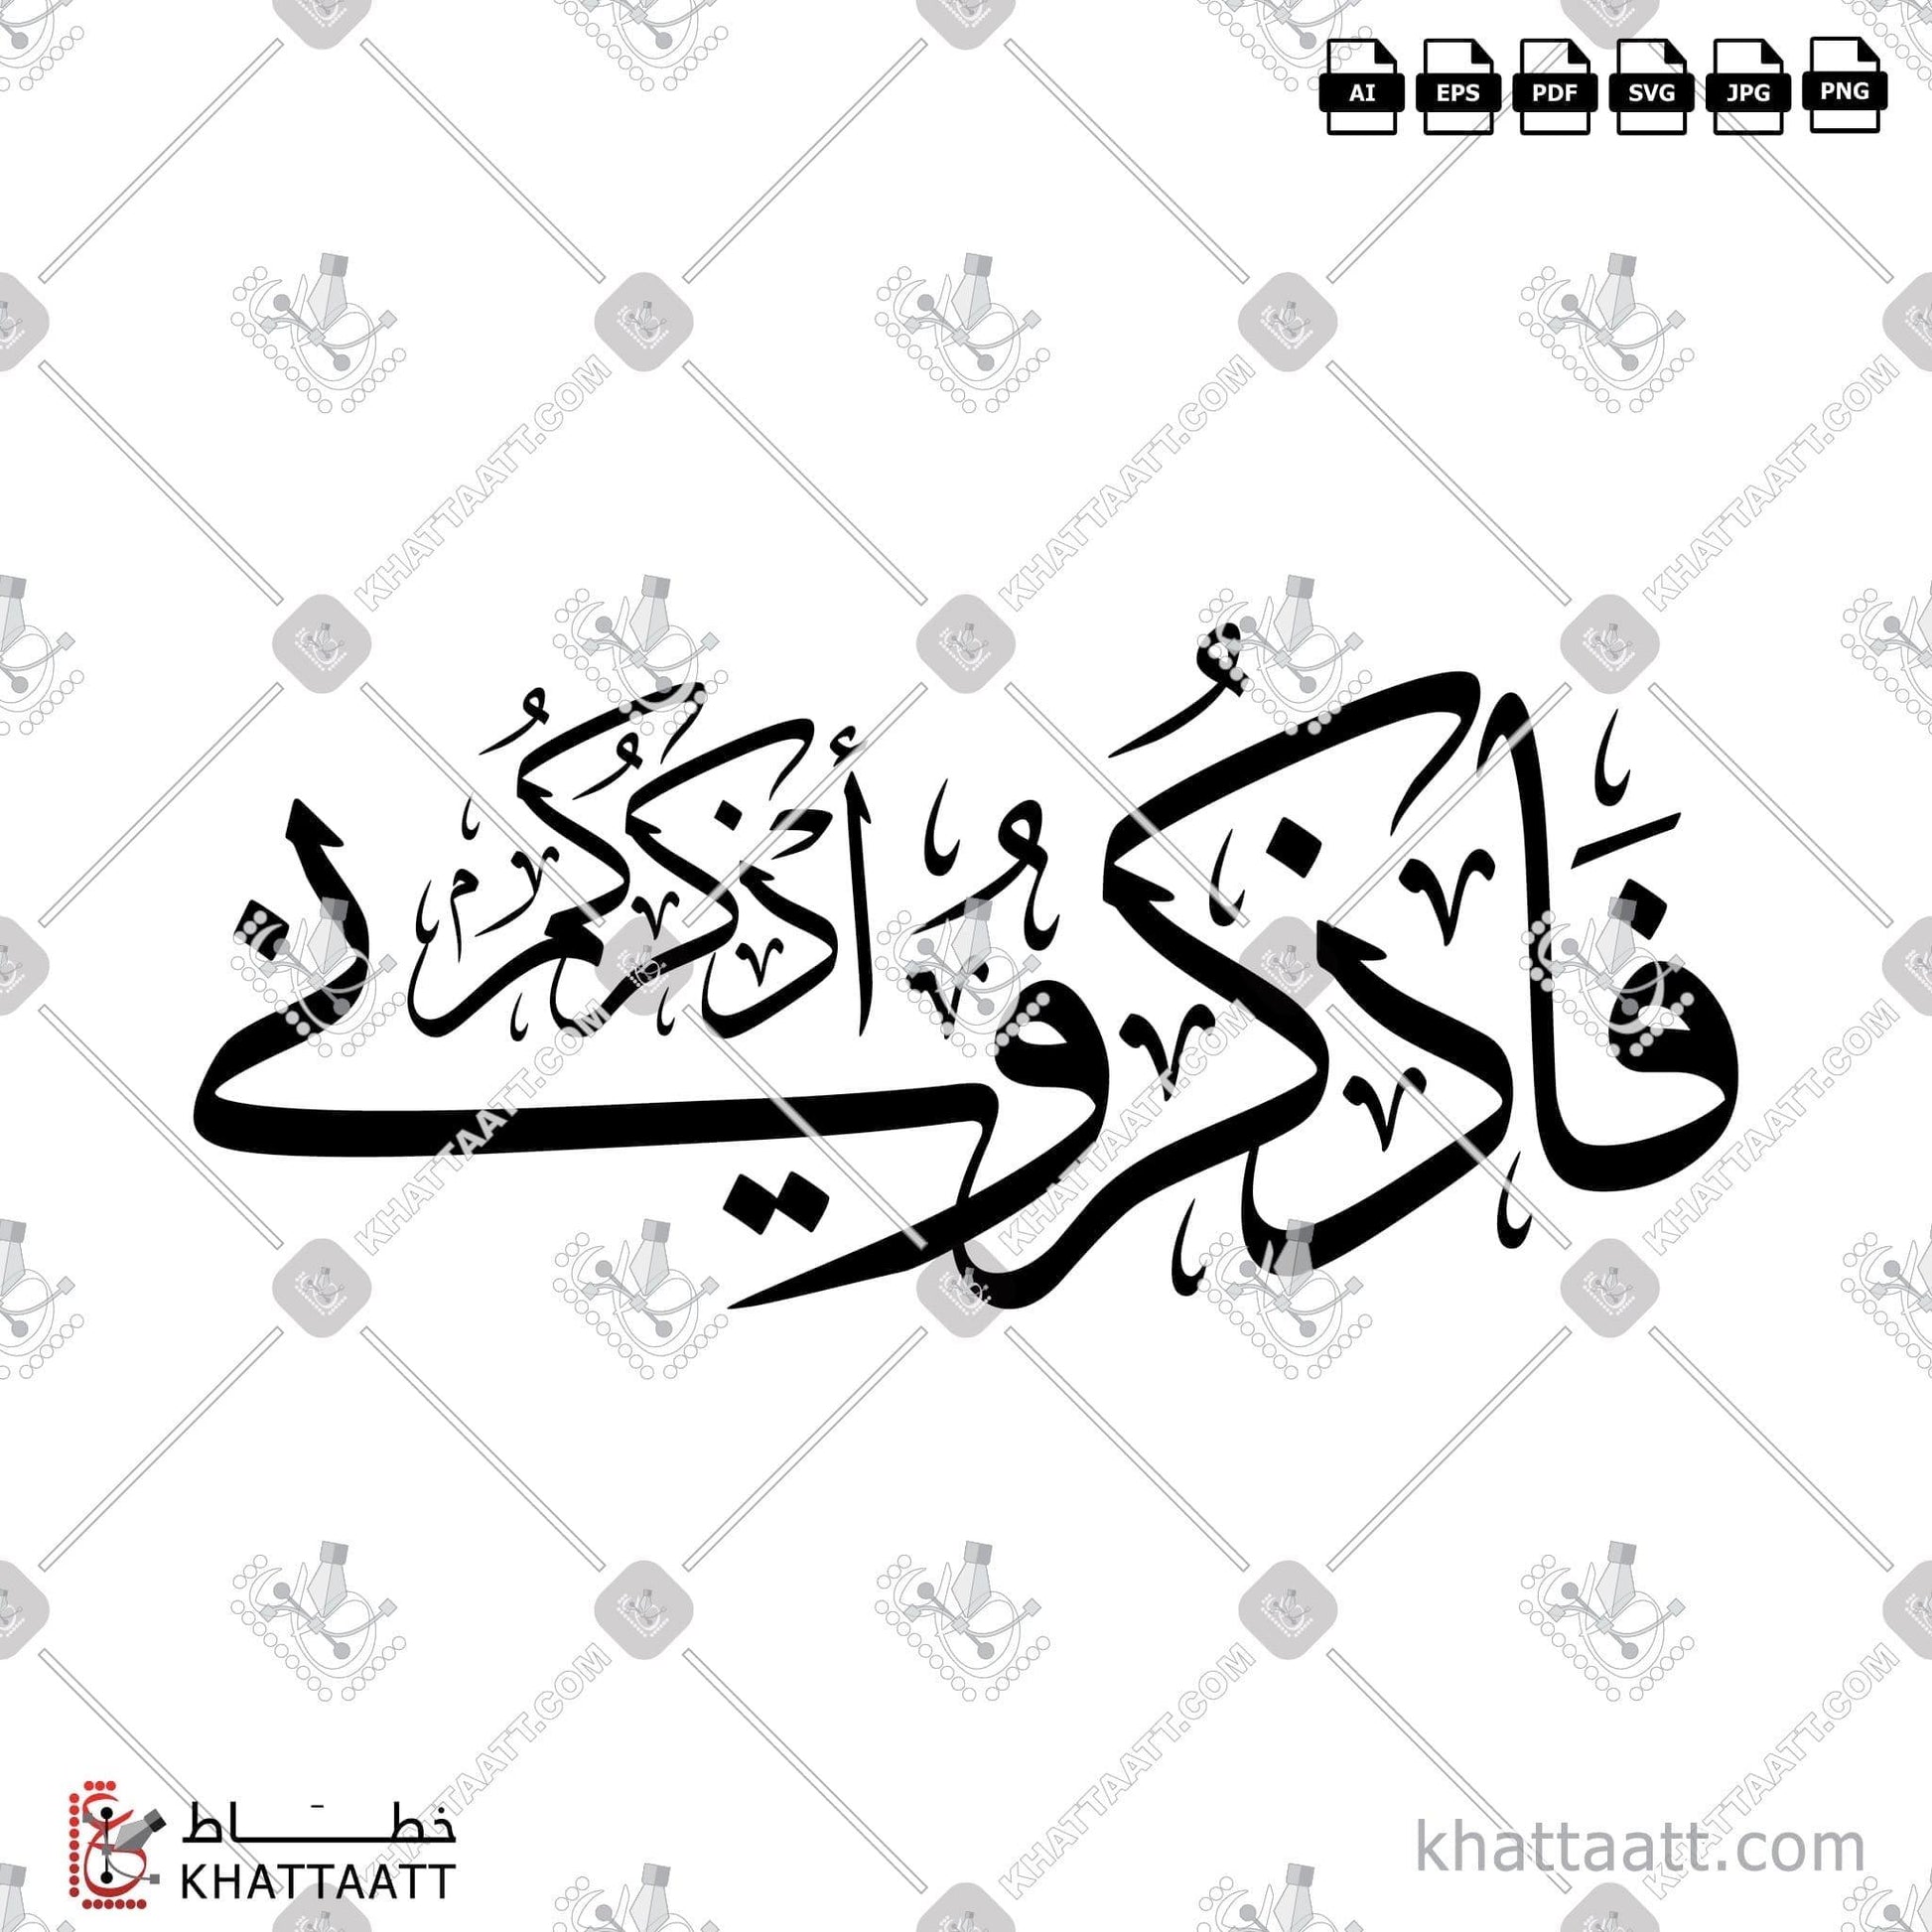 Download Arabic Calligraphy of فاذكروني أذكركم in Thuluth - خط الثلث in vector and .png